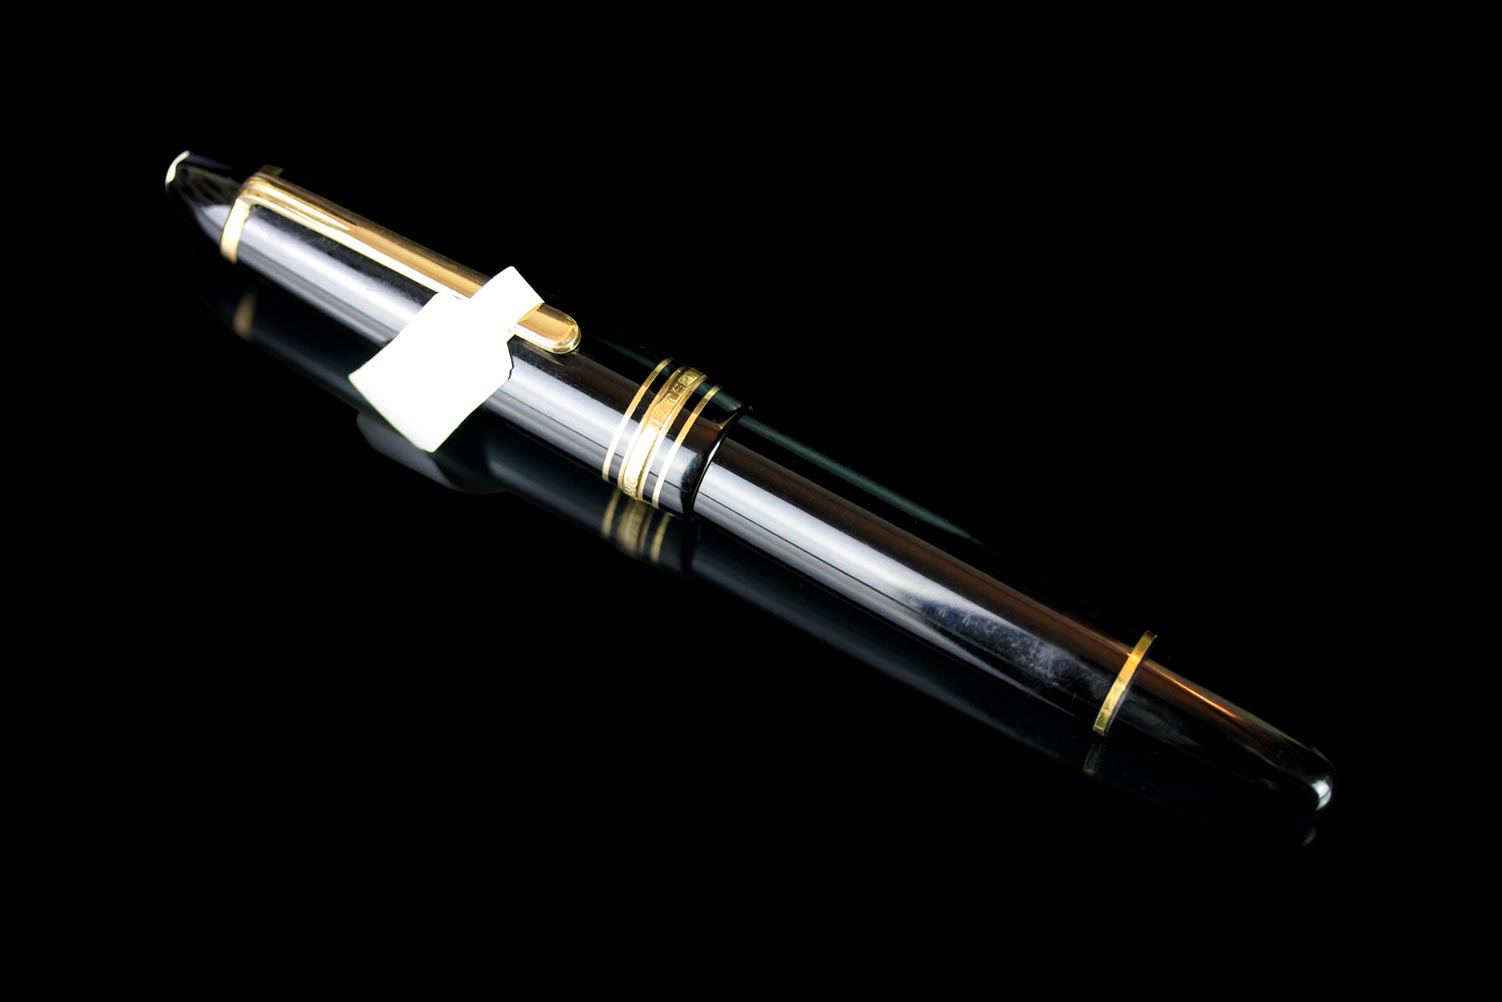 MONT BLANC MEISTERSTRUCK FOUNTAIN PEN, gold plated and black resin, no 146